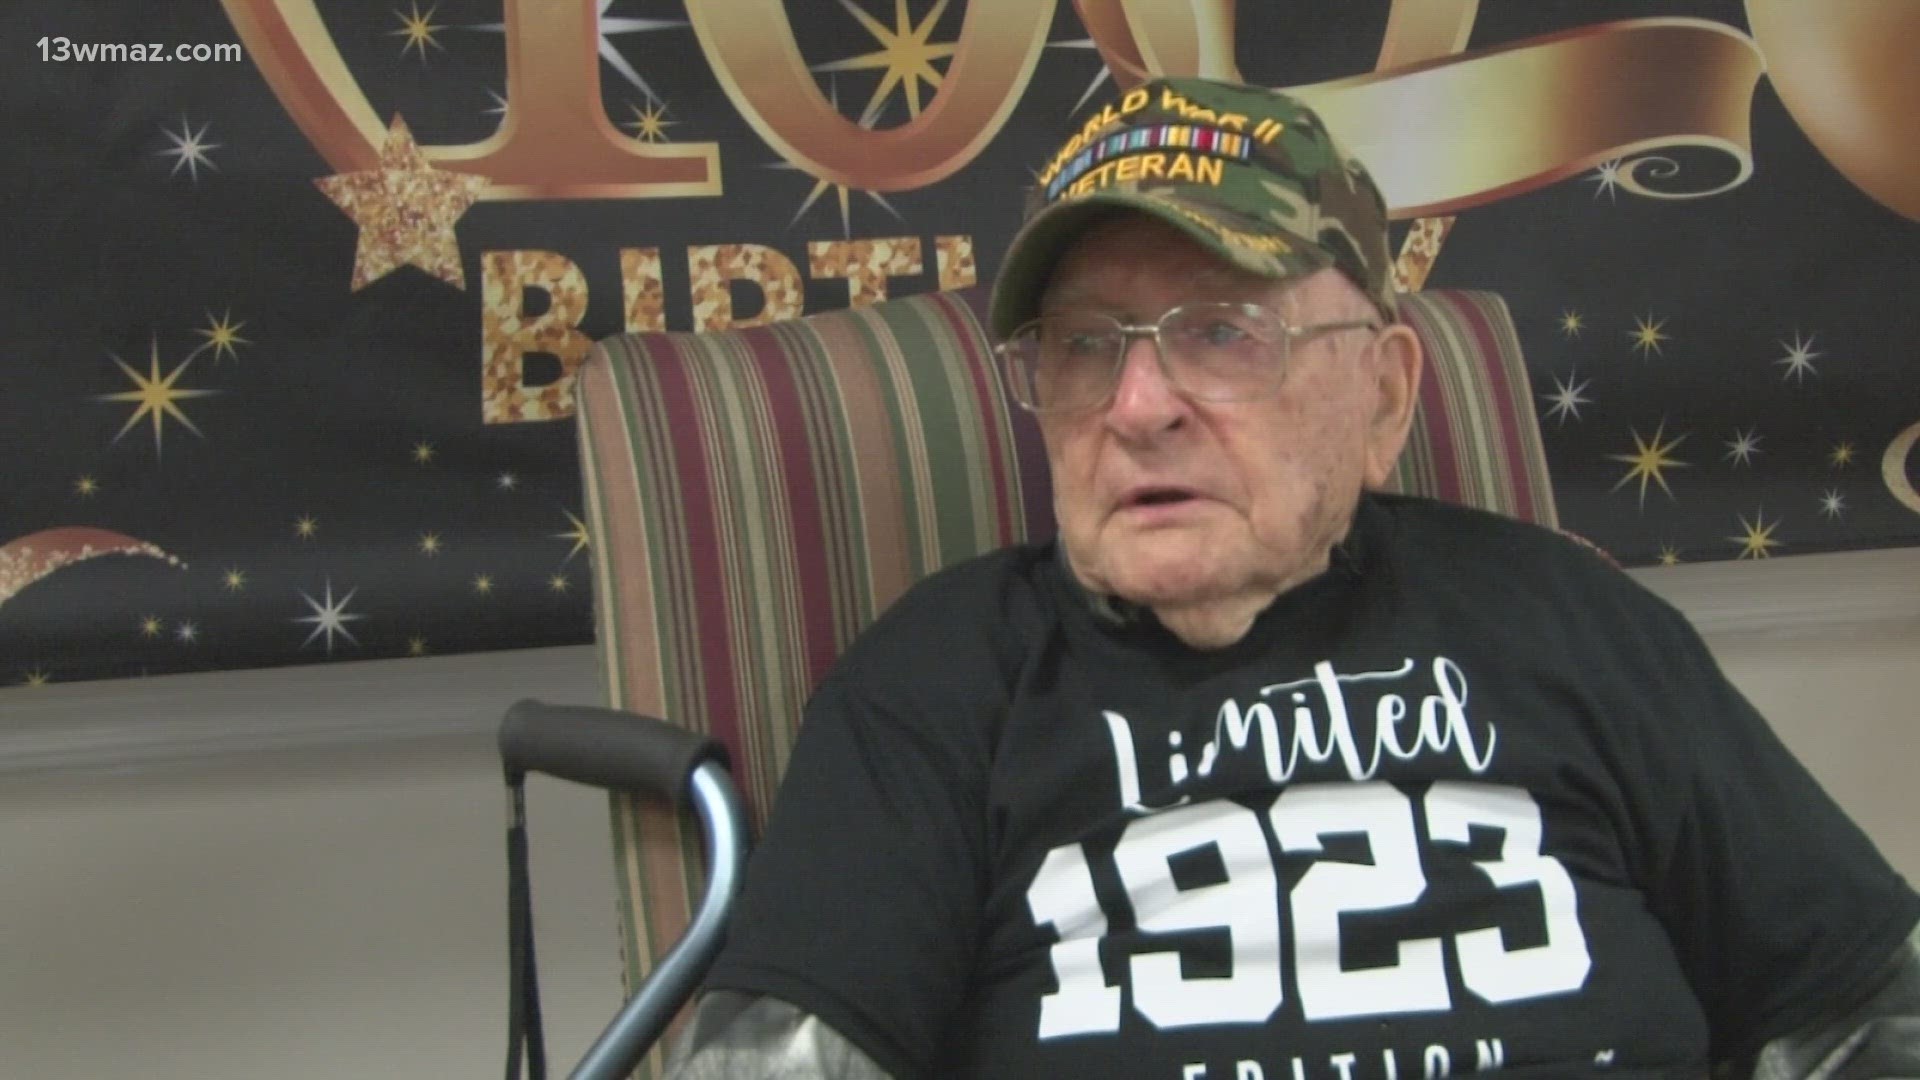 Calvin Smith is one of the last-living World War II veterans, and he turned 100 on Friday.